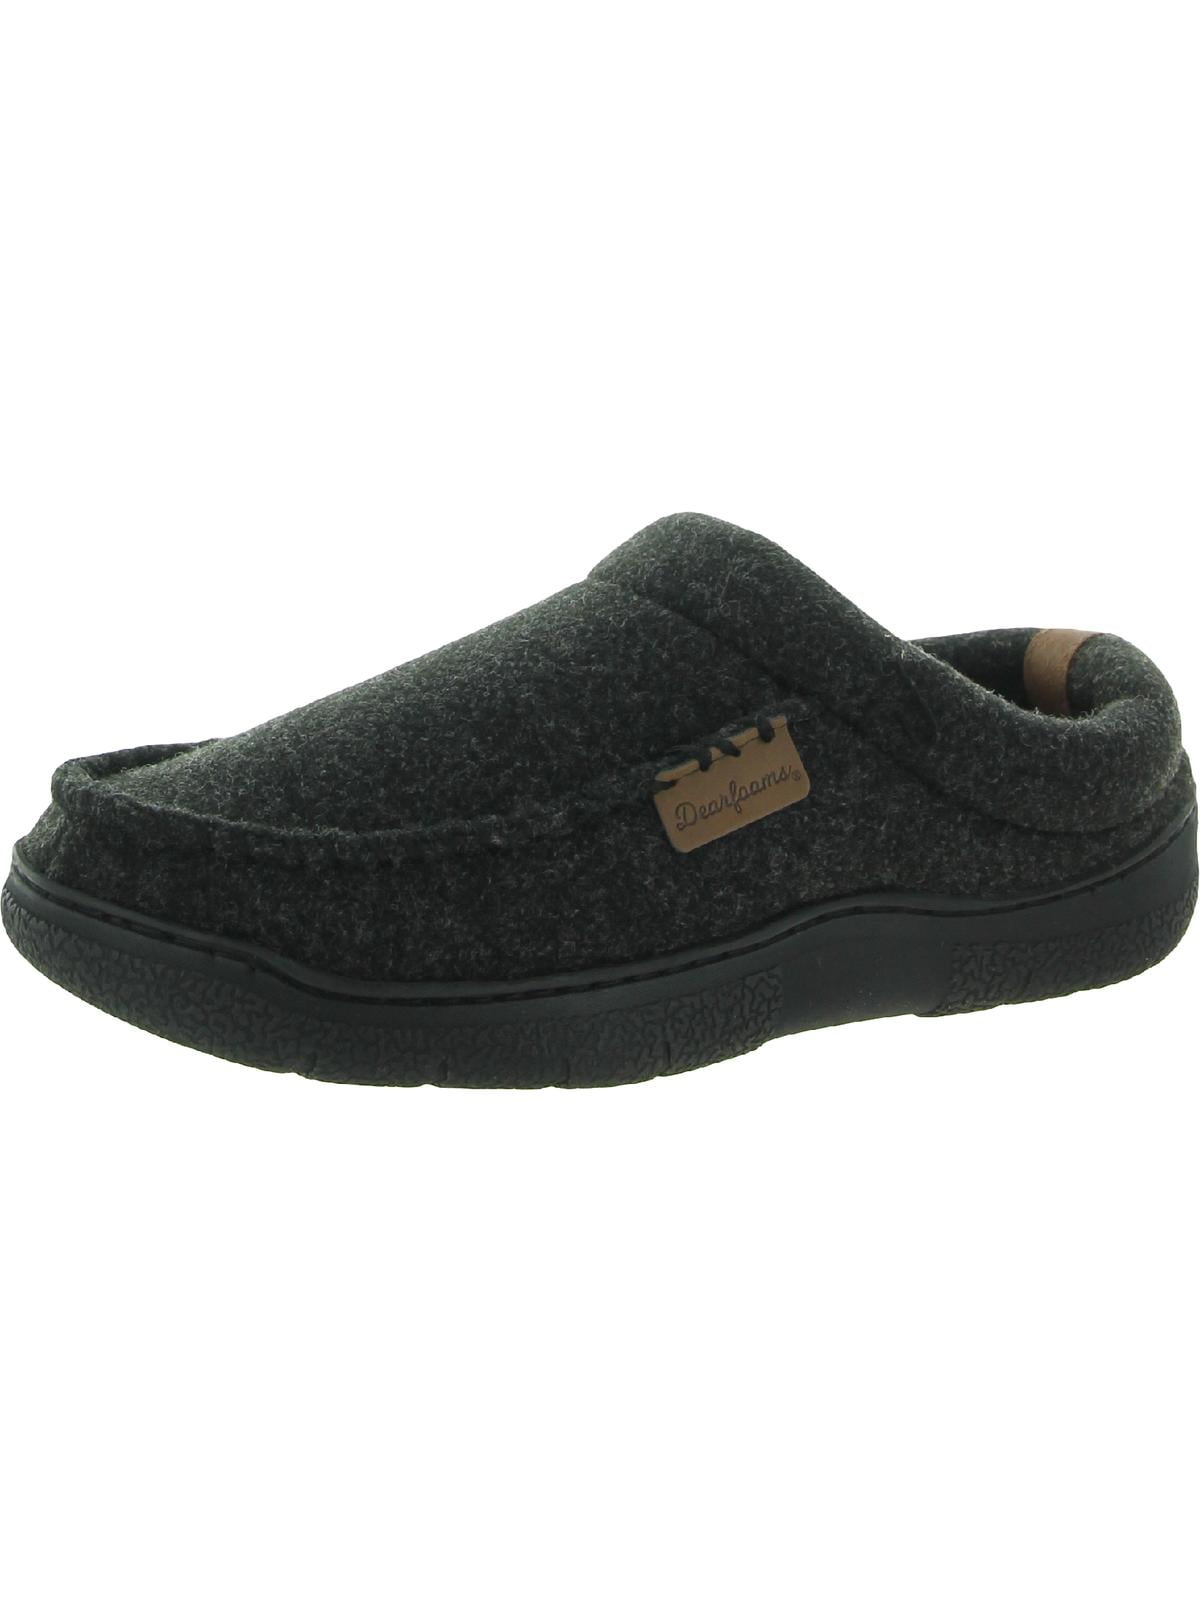 MENS DEARFOAMS Indoor/Outdoor BLACK Sturdy  MOCCASIN SLIPPERS Small 7-8 